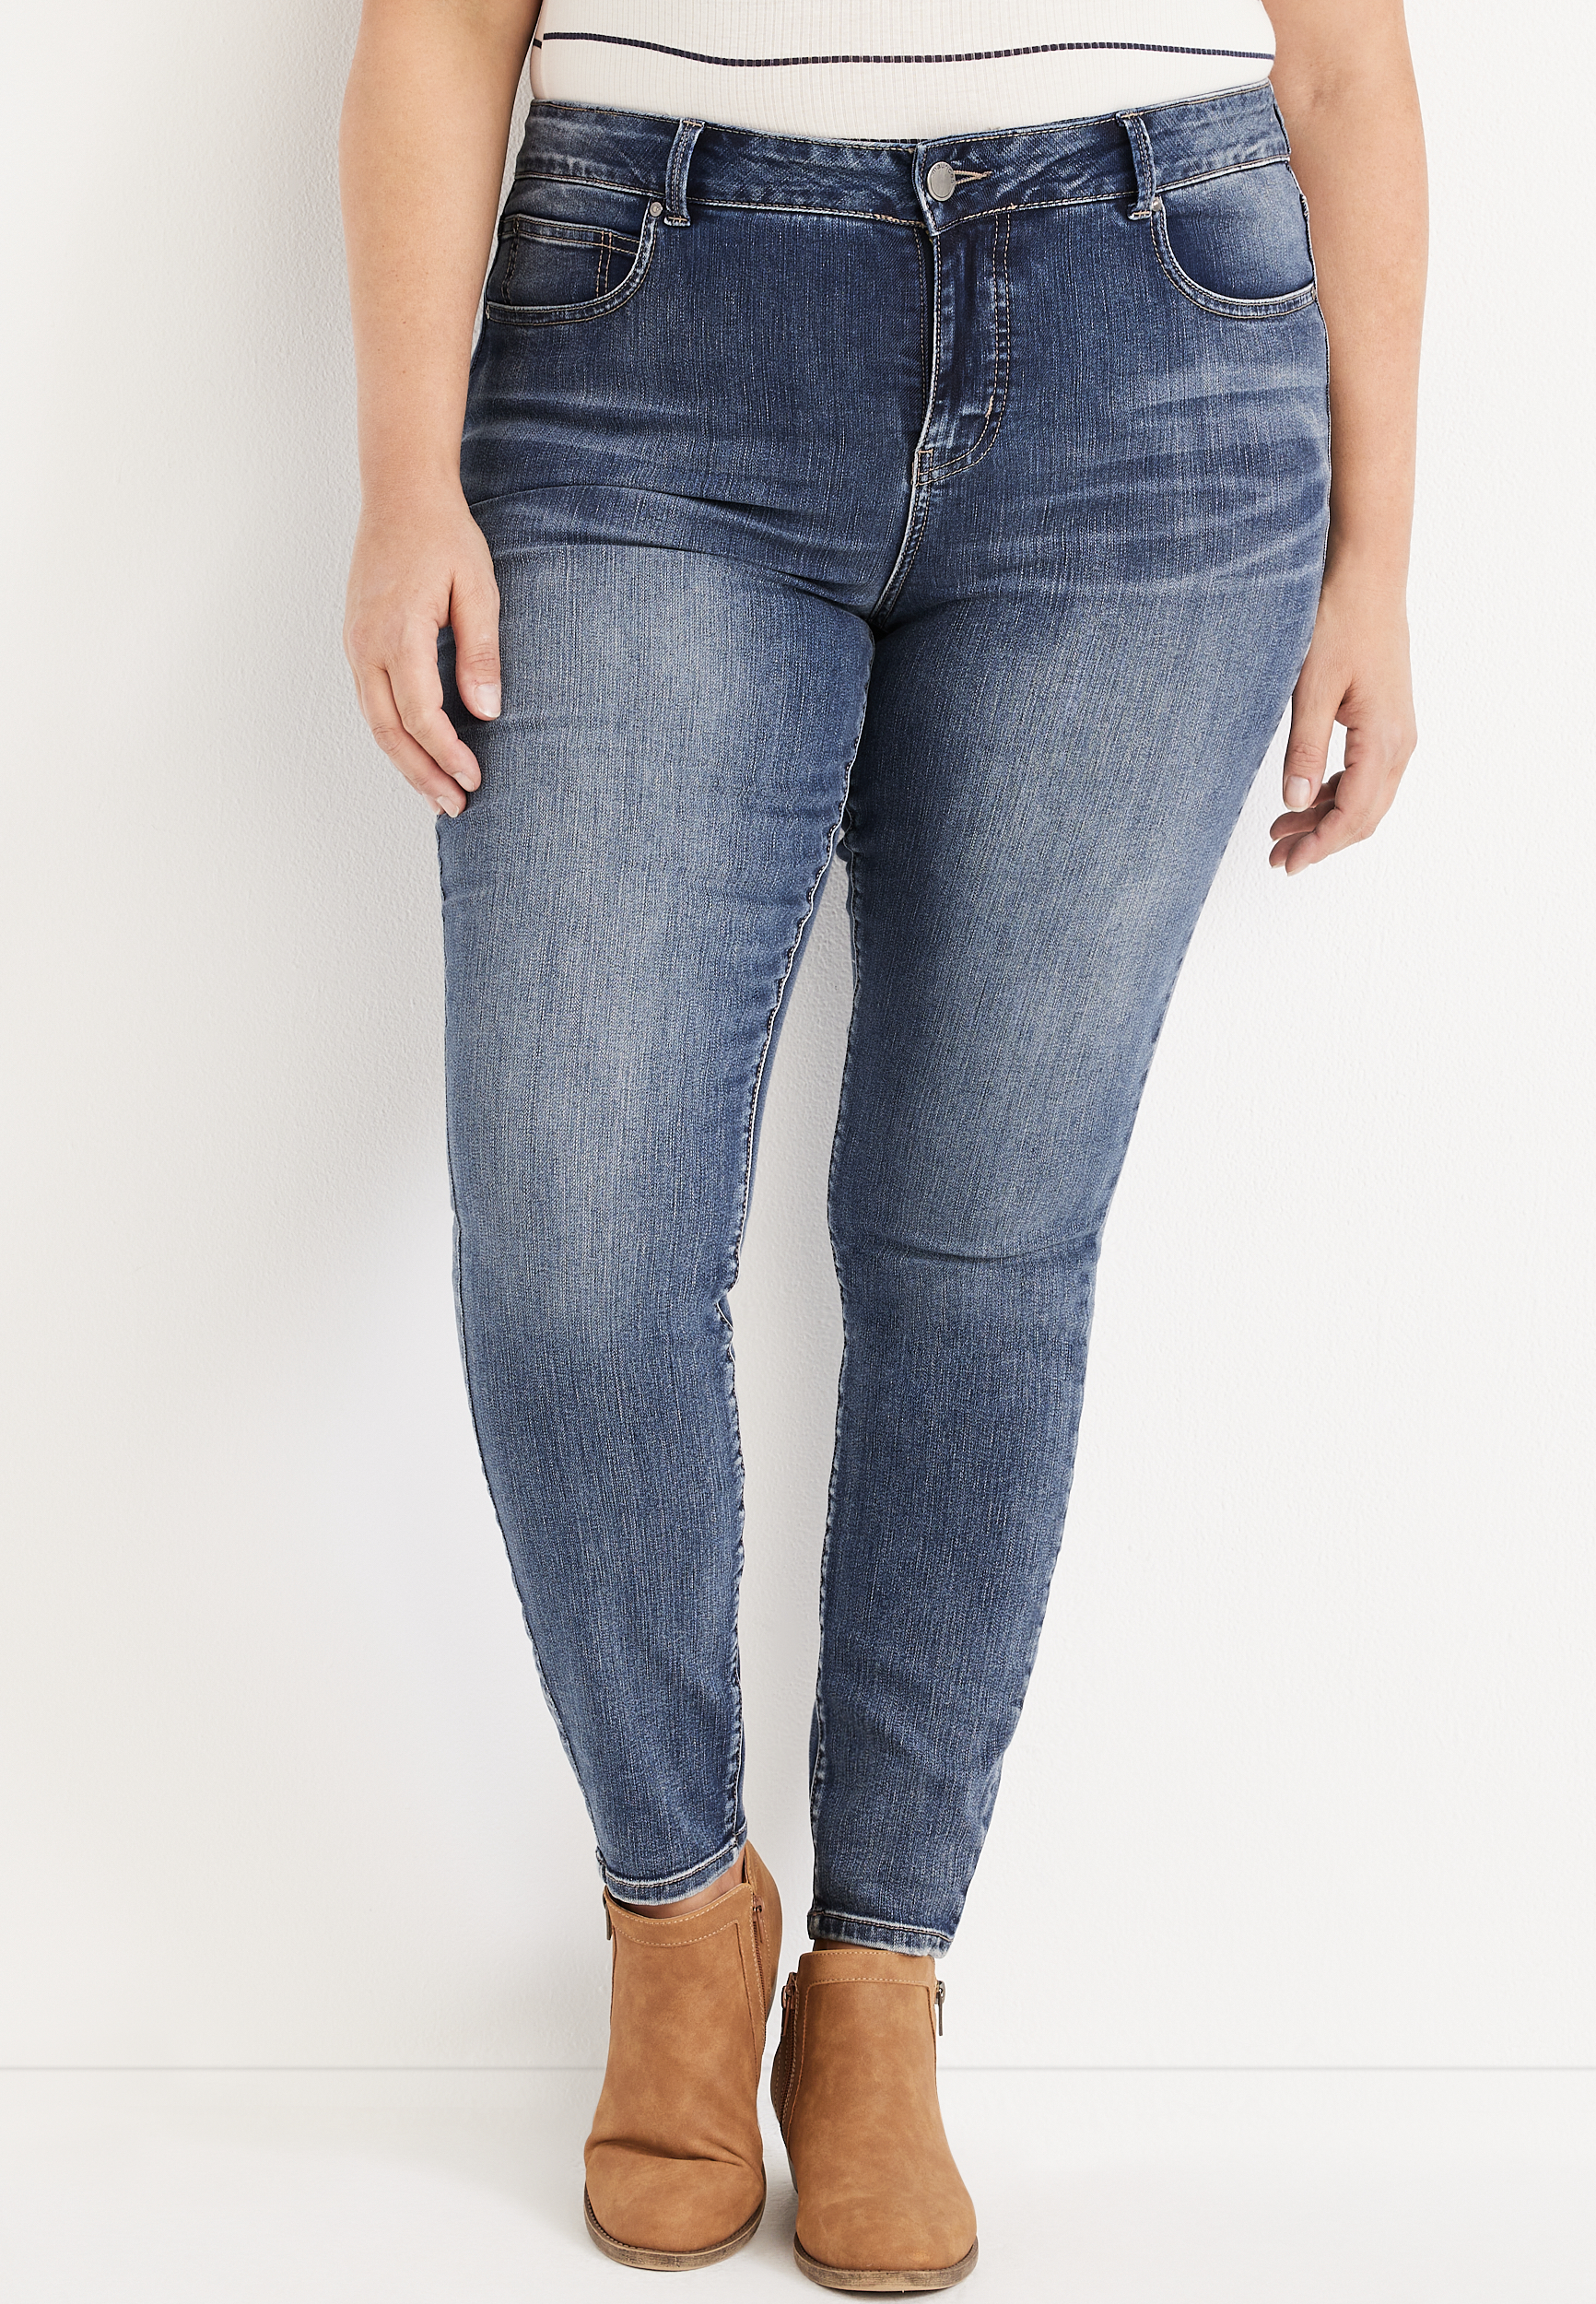 m jeans by maurices™ Everflex™ High Rise Slim Straight Ankle Jean